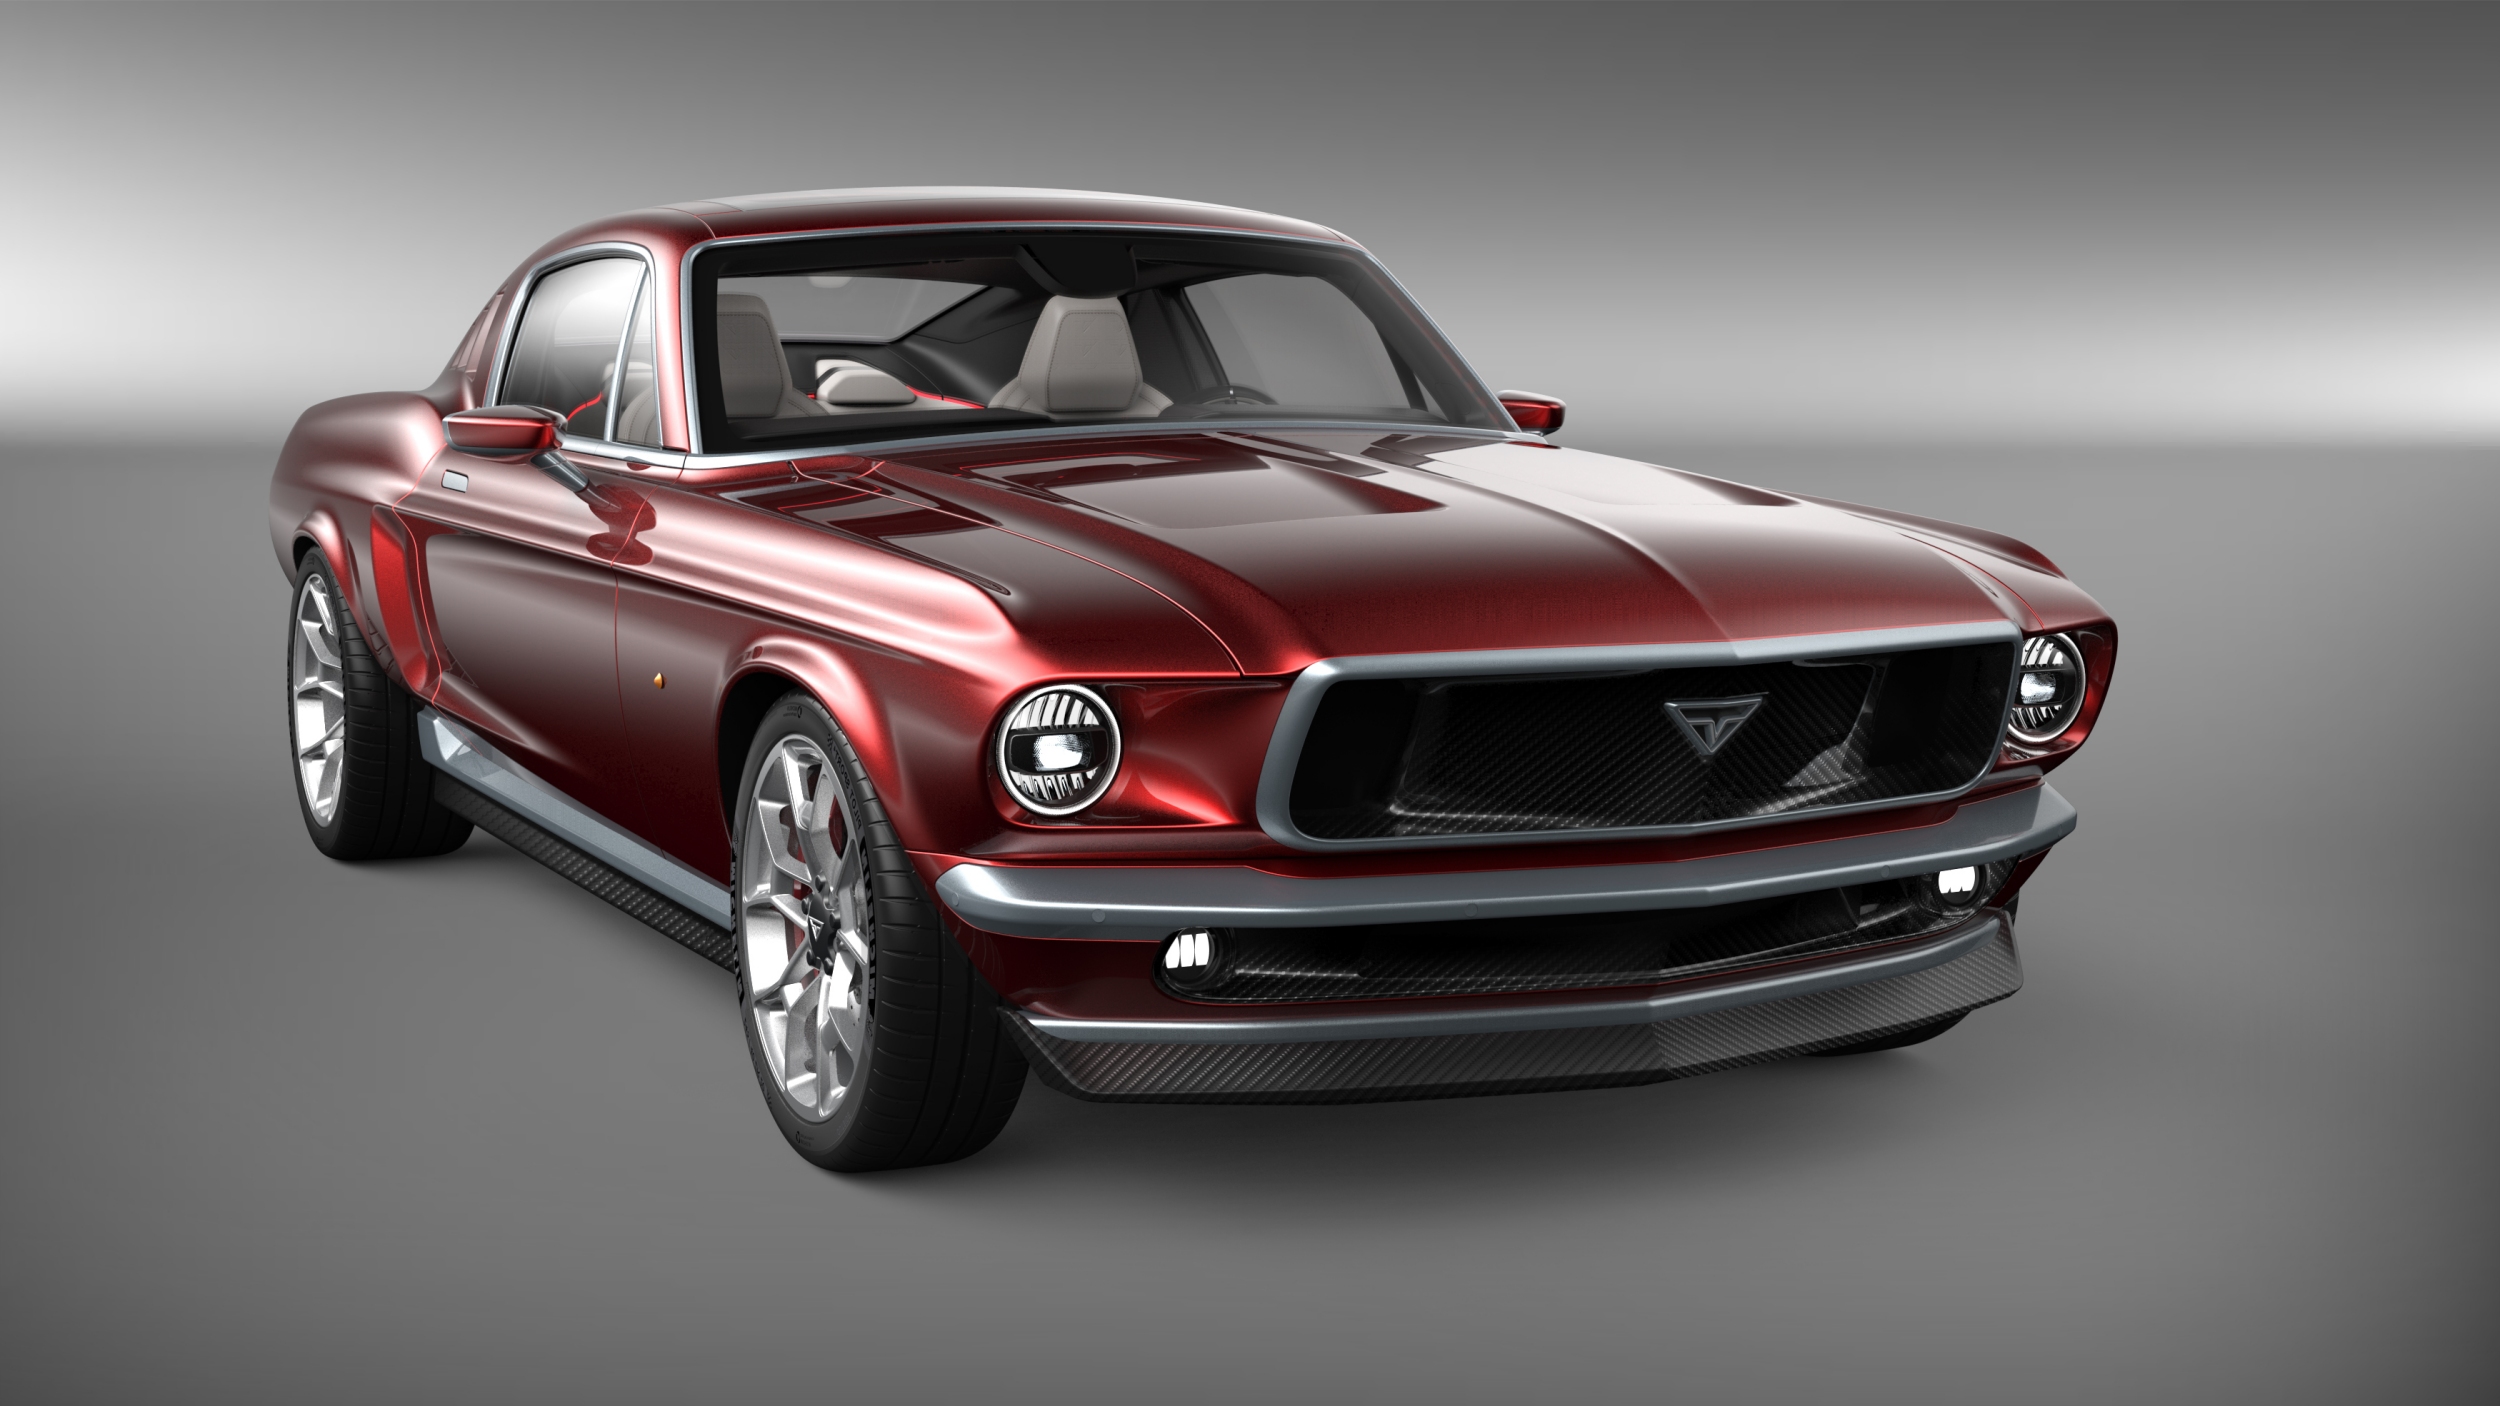 The Aviar R67 is a 840 HP, all-electric classic Mustang